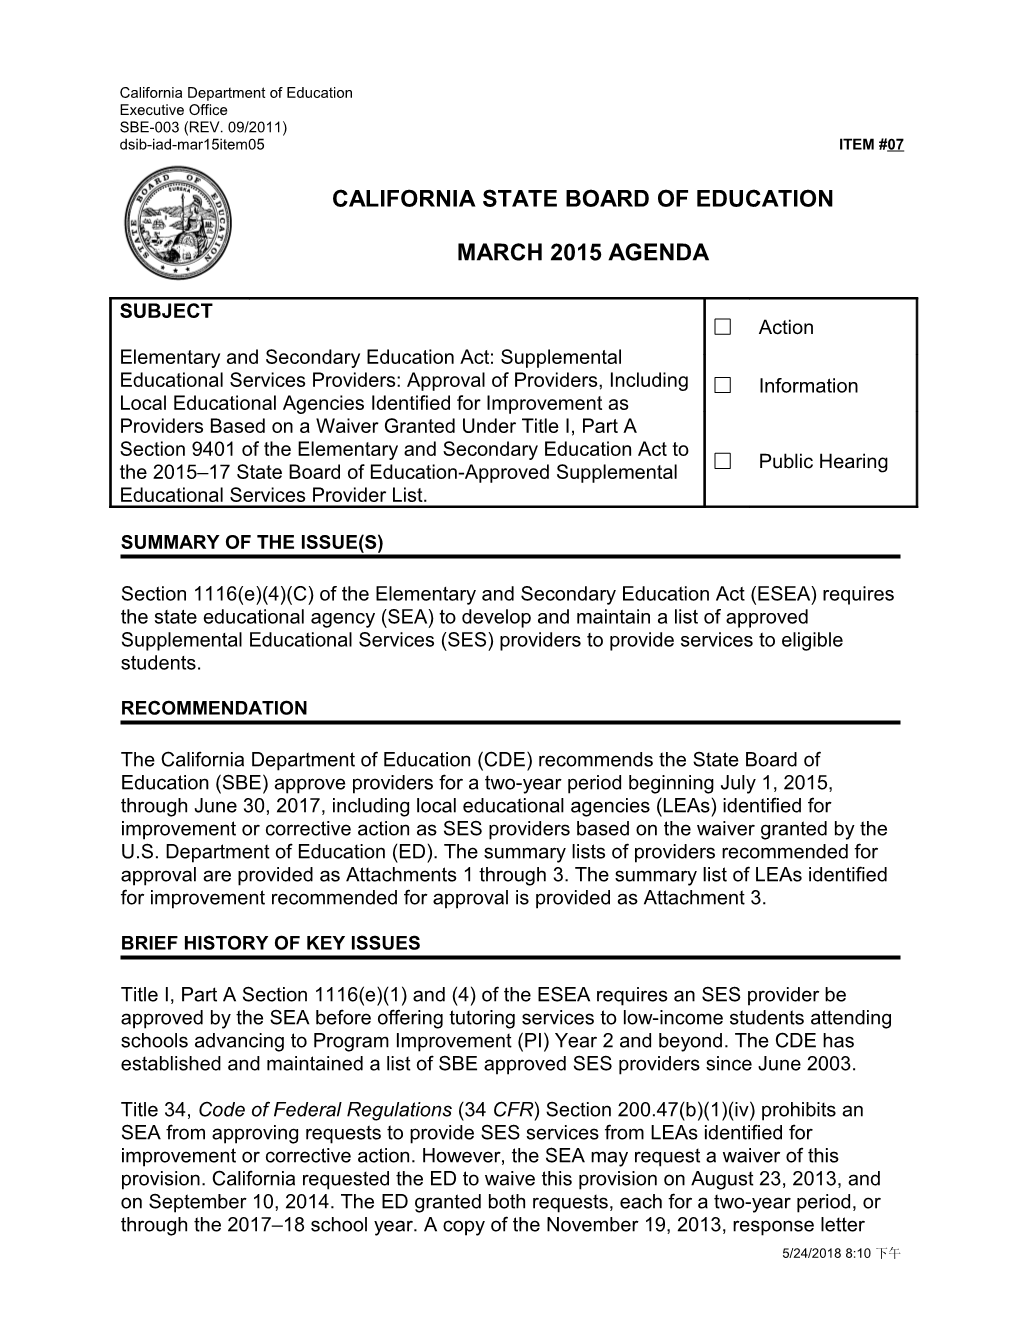 March 2015 Agenda Item 07 - Meeting Agendas (CA State Board of Education)